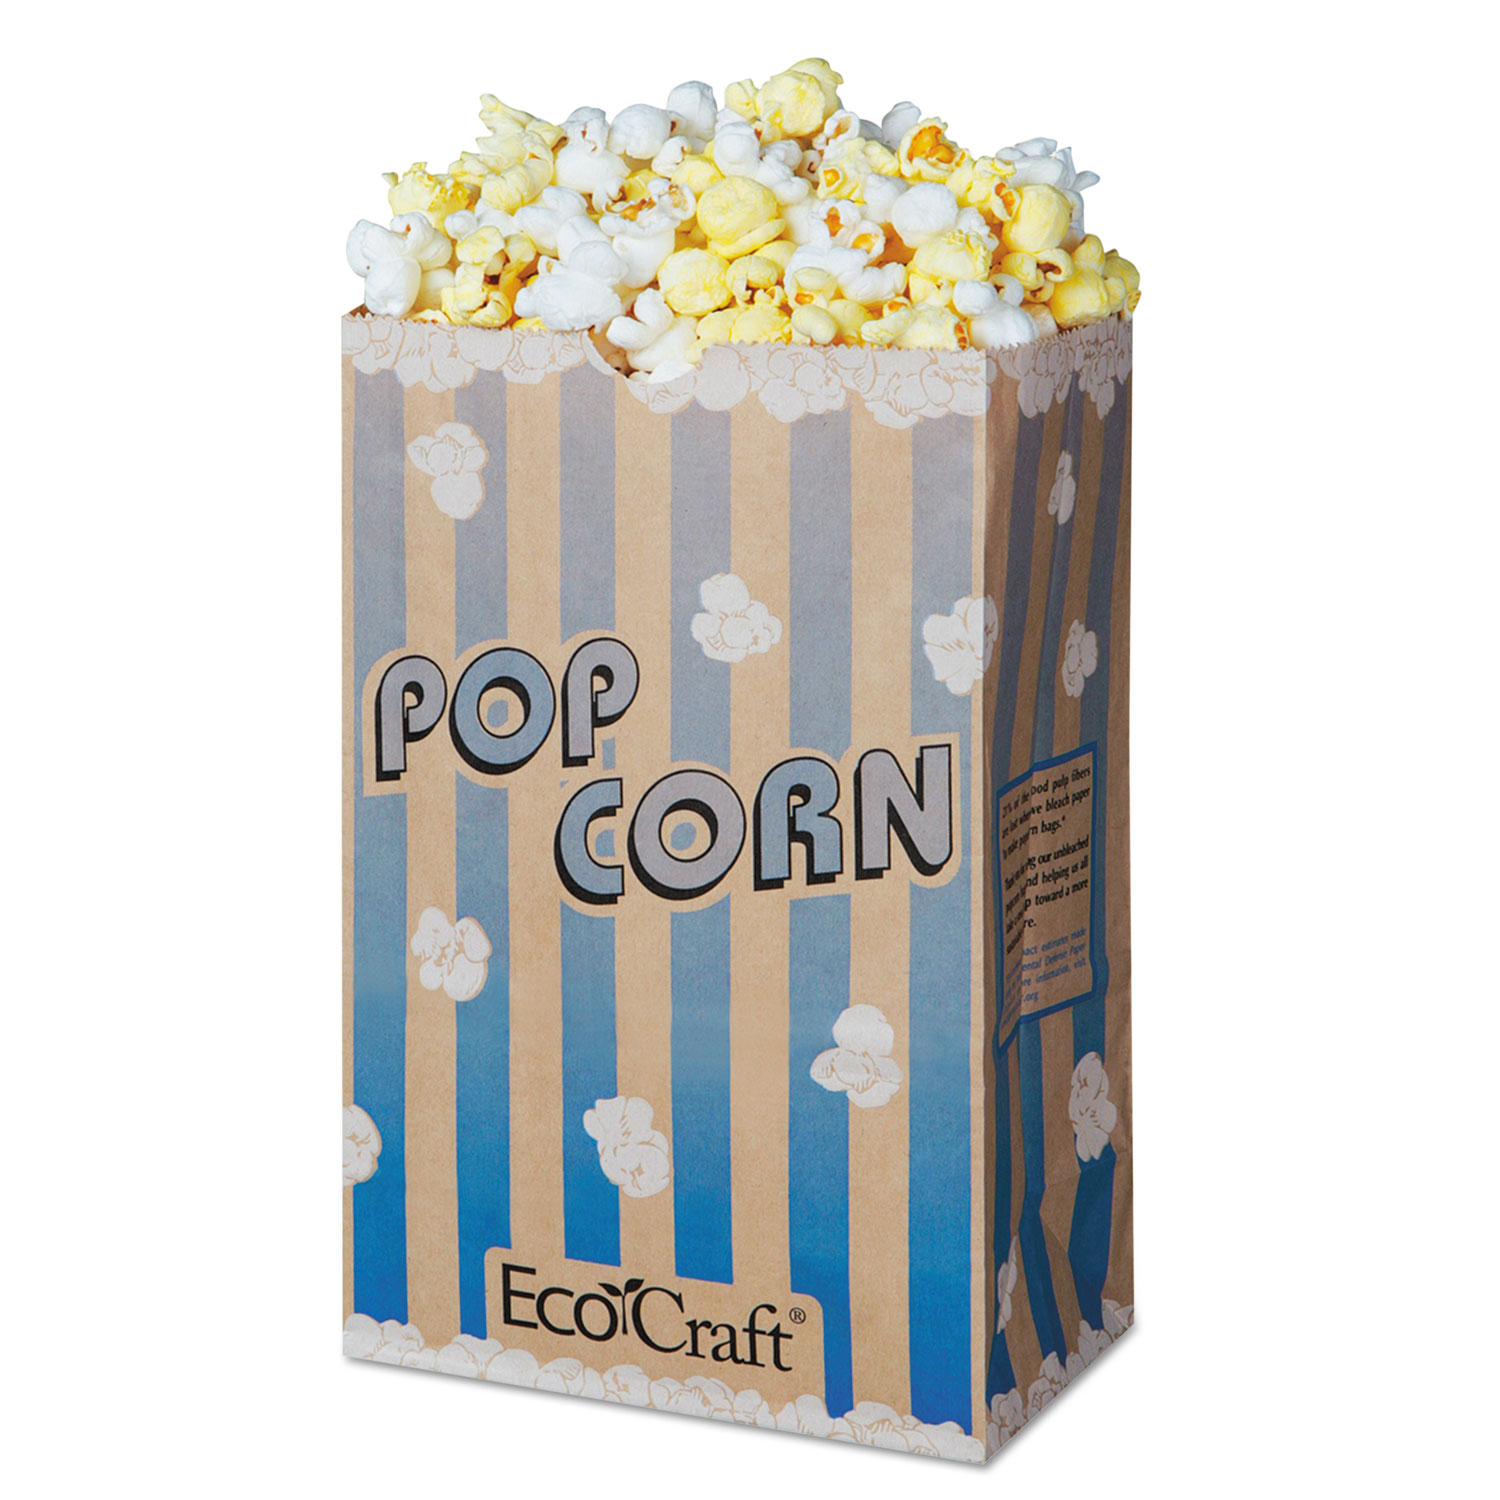 EcoCraft Grease-Resistant Popcorn Bags, 85 oz, 2-ply, 3.25